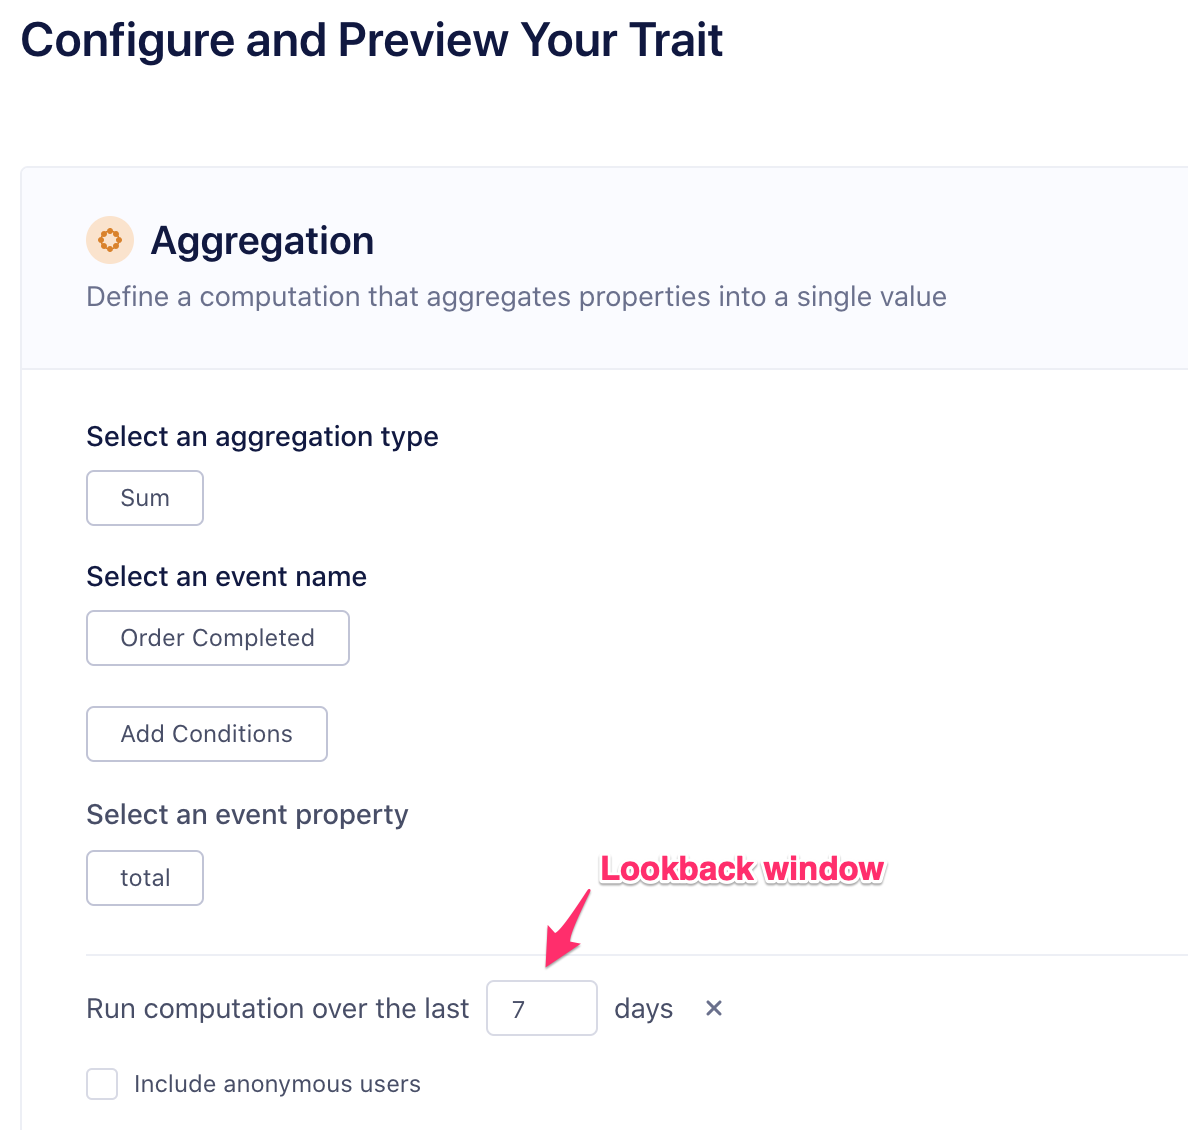 A screenshot of the "Configure and Preview Your Trait" page in Segment.